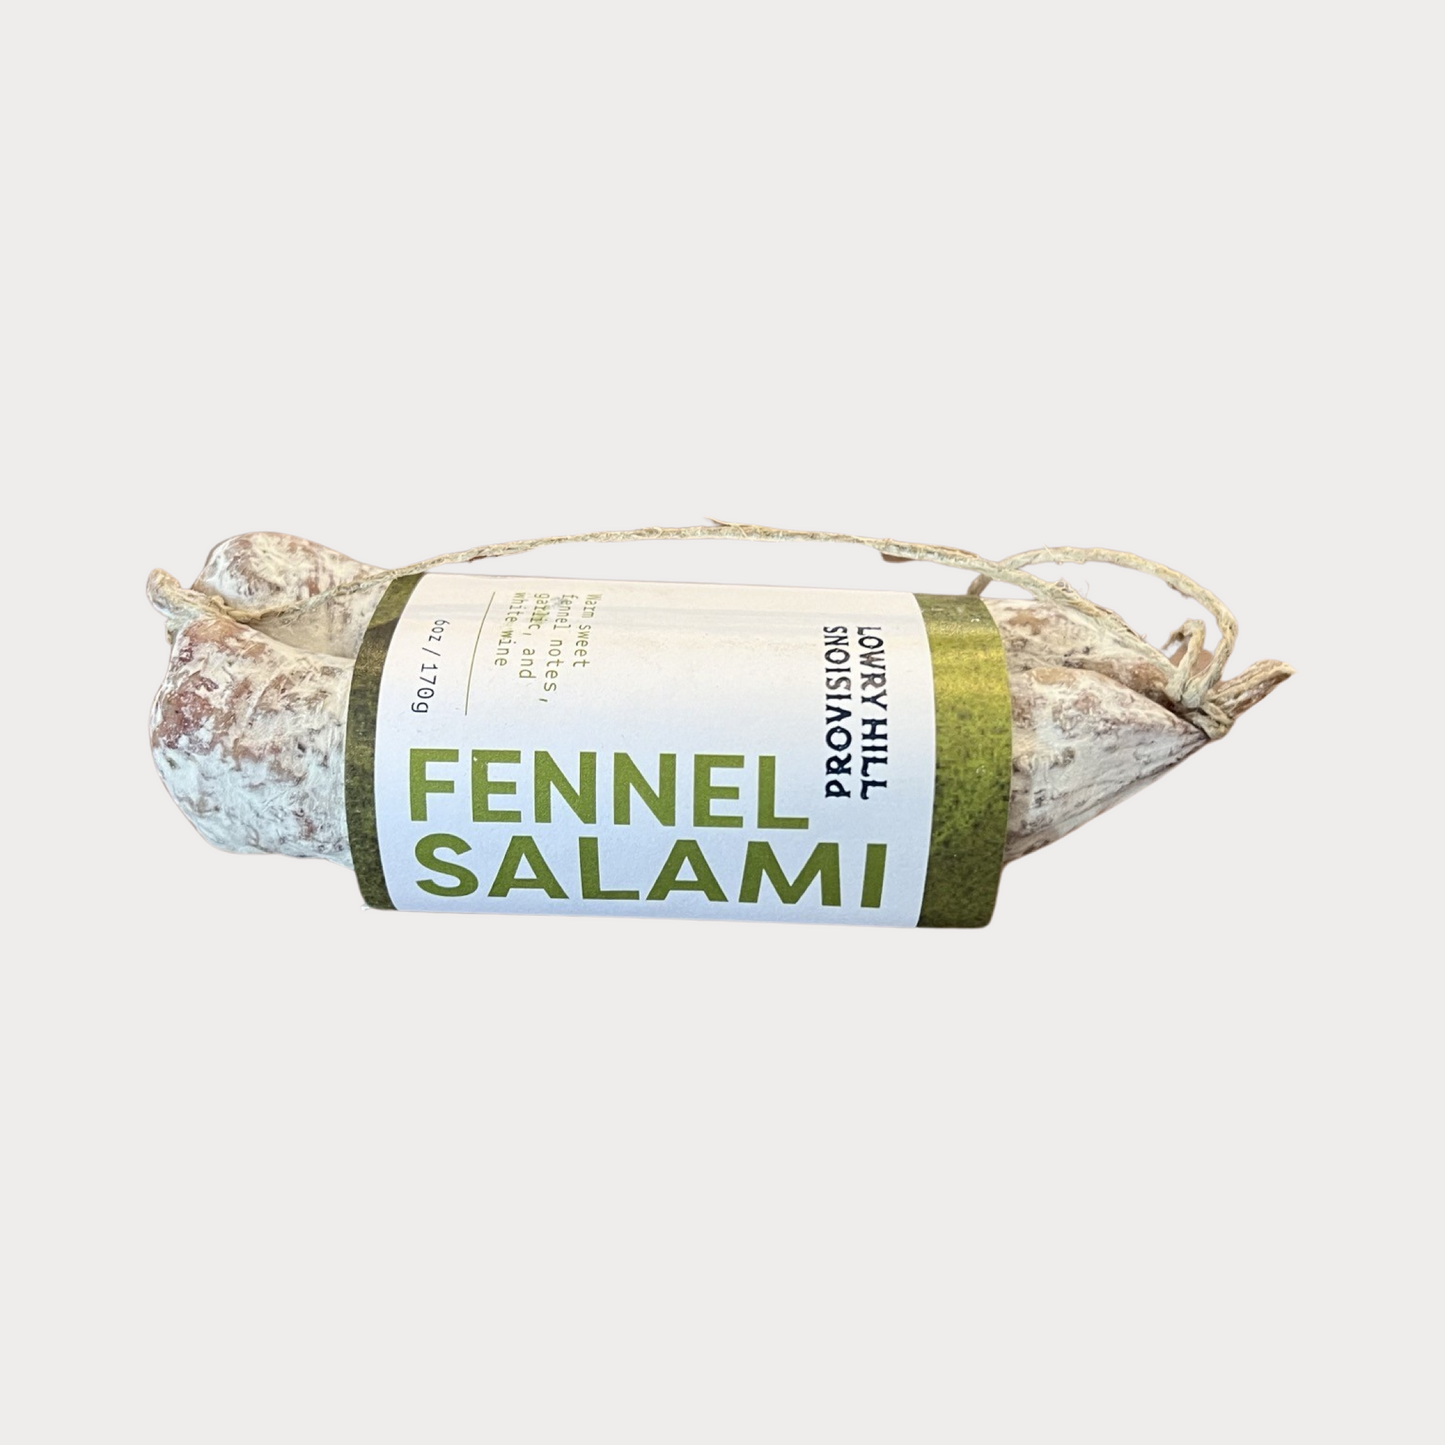 Lowry Hill Provisions Fennel Salami